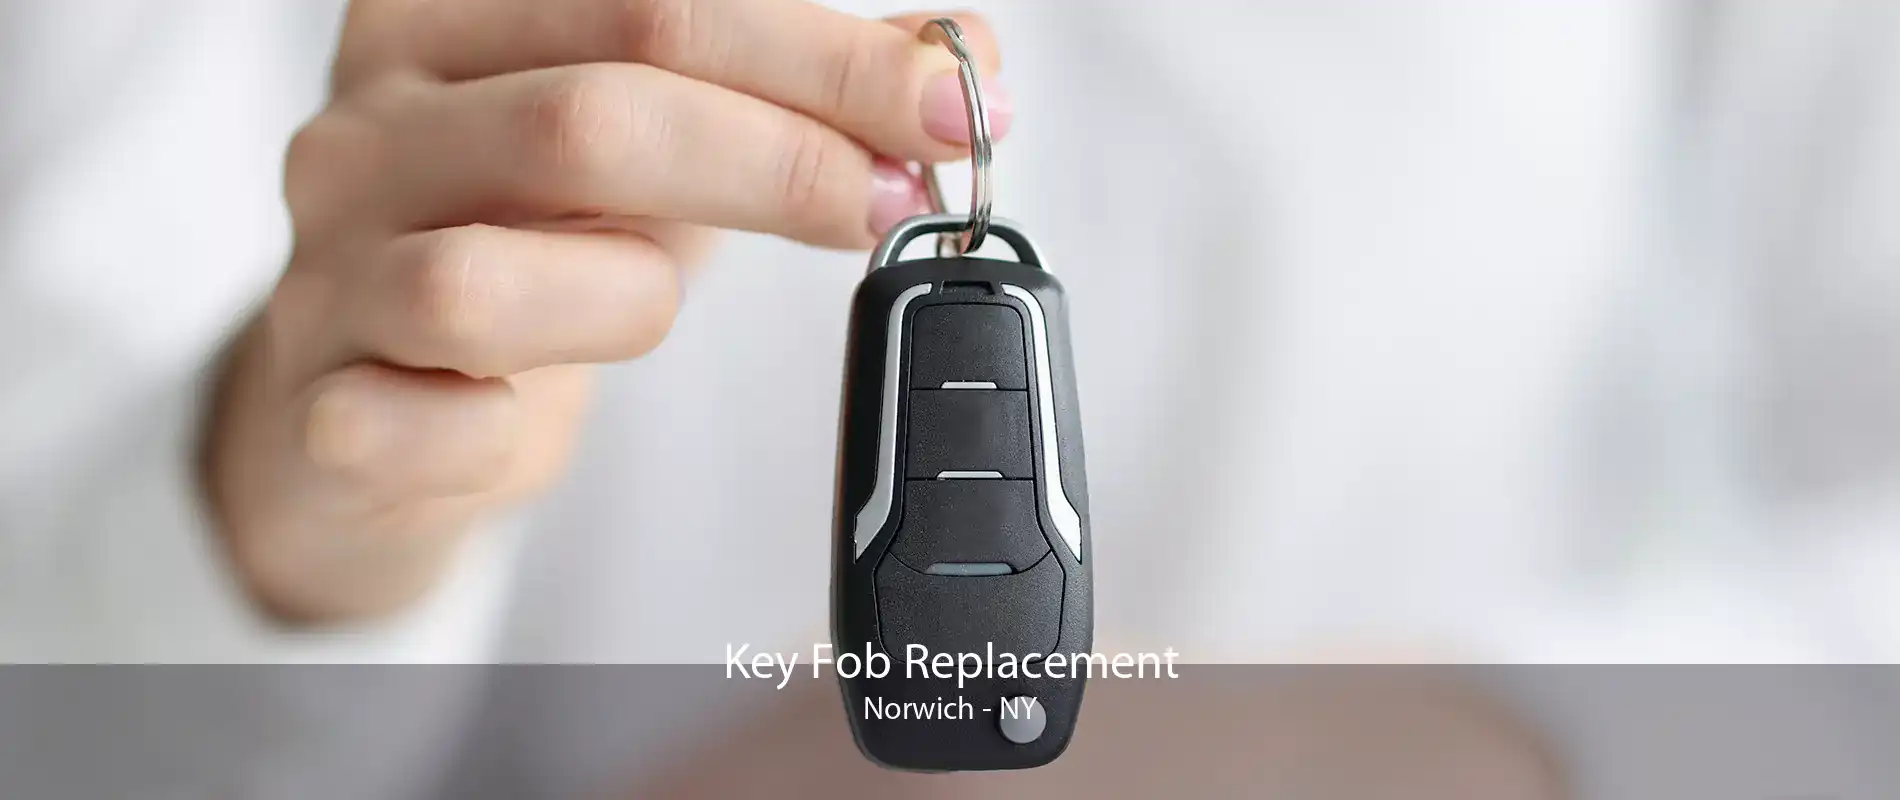 Key Fob Replacement Norwich - NY